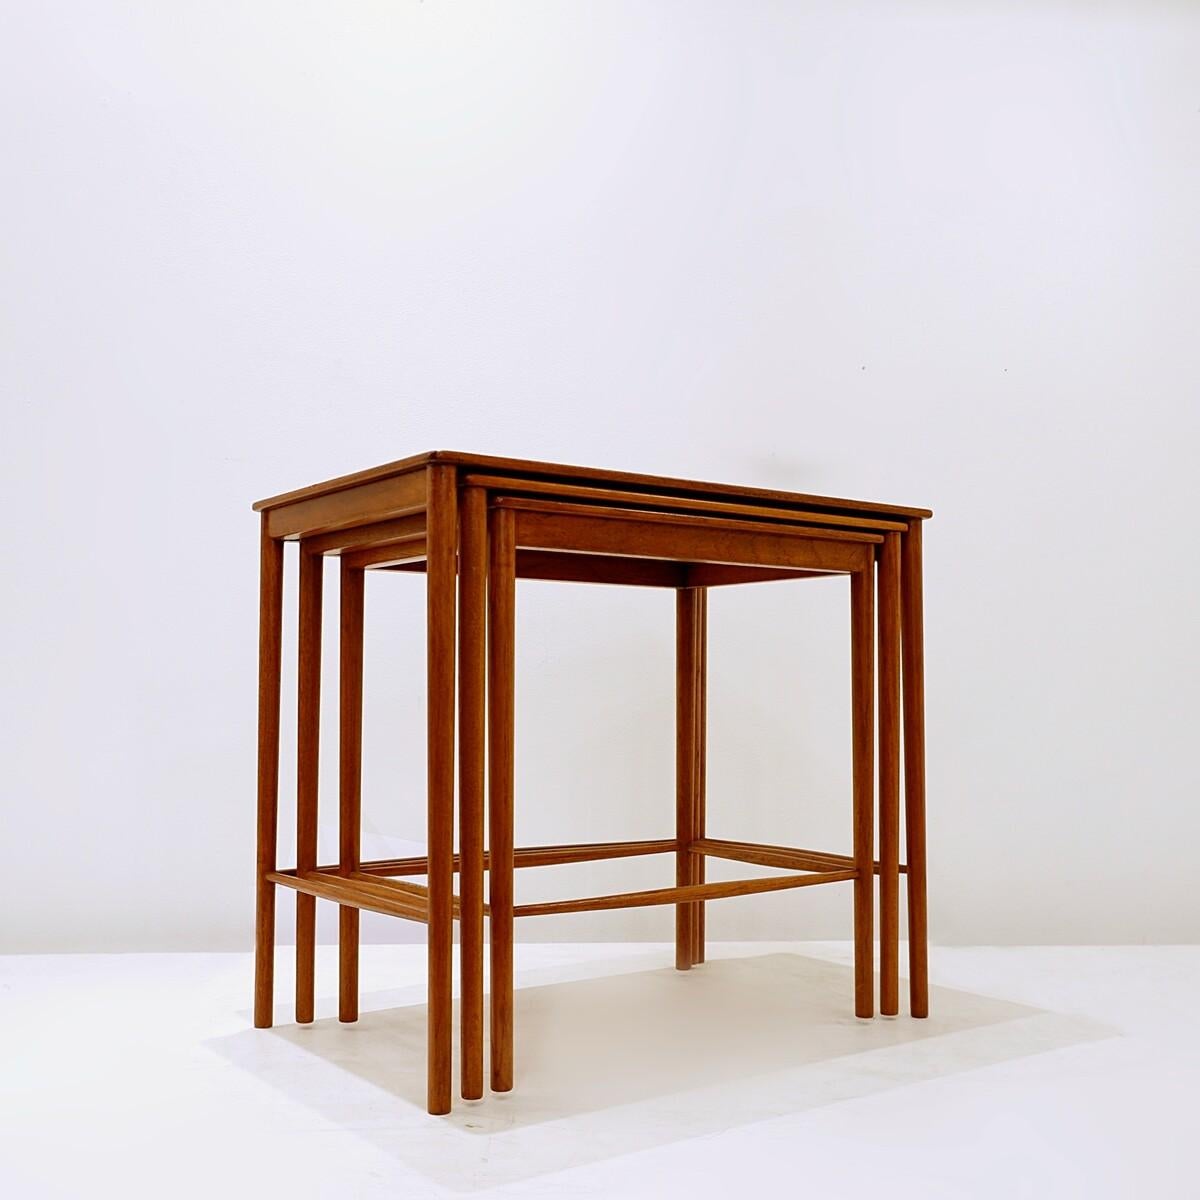 Very pratical Danish nesting tables with warm tones